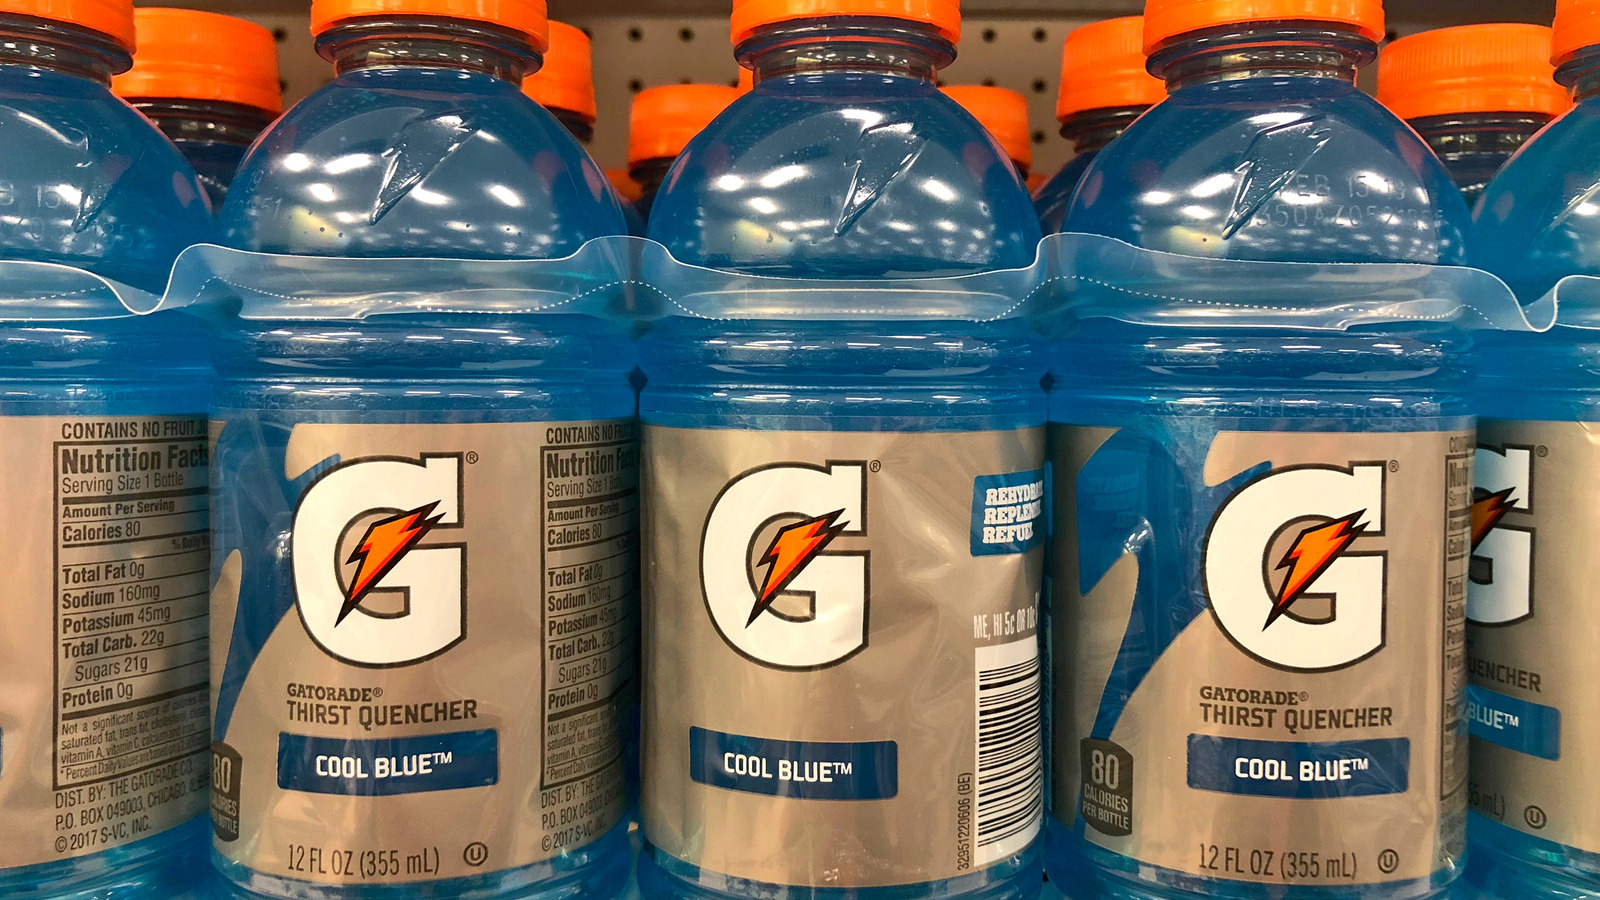 https://www.thedailymeal.com/img/gallery/how-does-one-define-the-flavor-of-cool-blue-gatorade/l-intro-1689957517.jpg